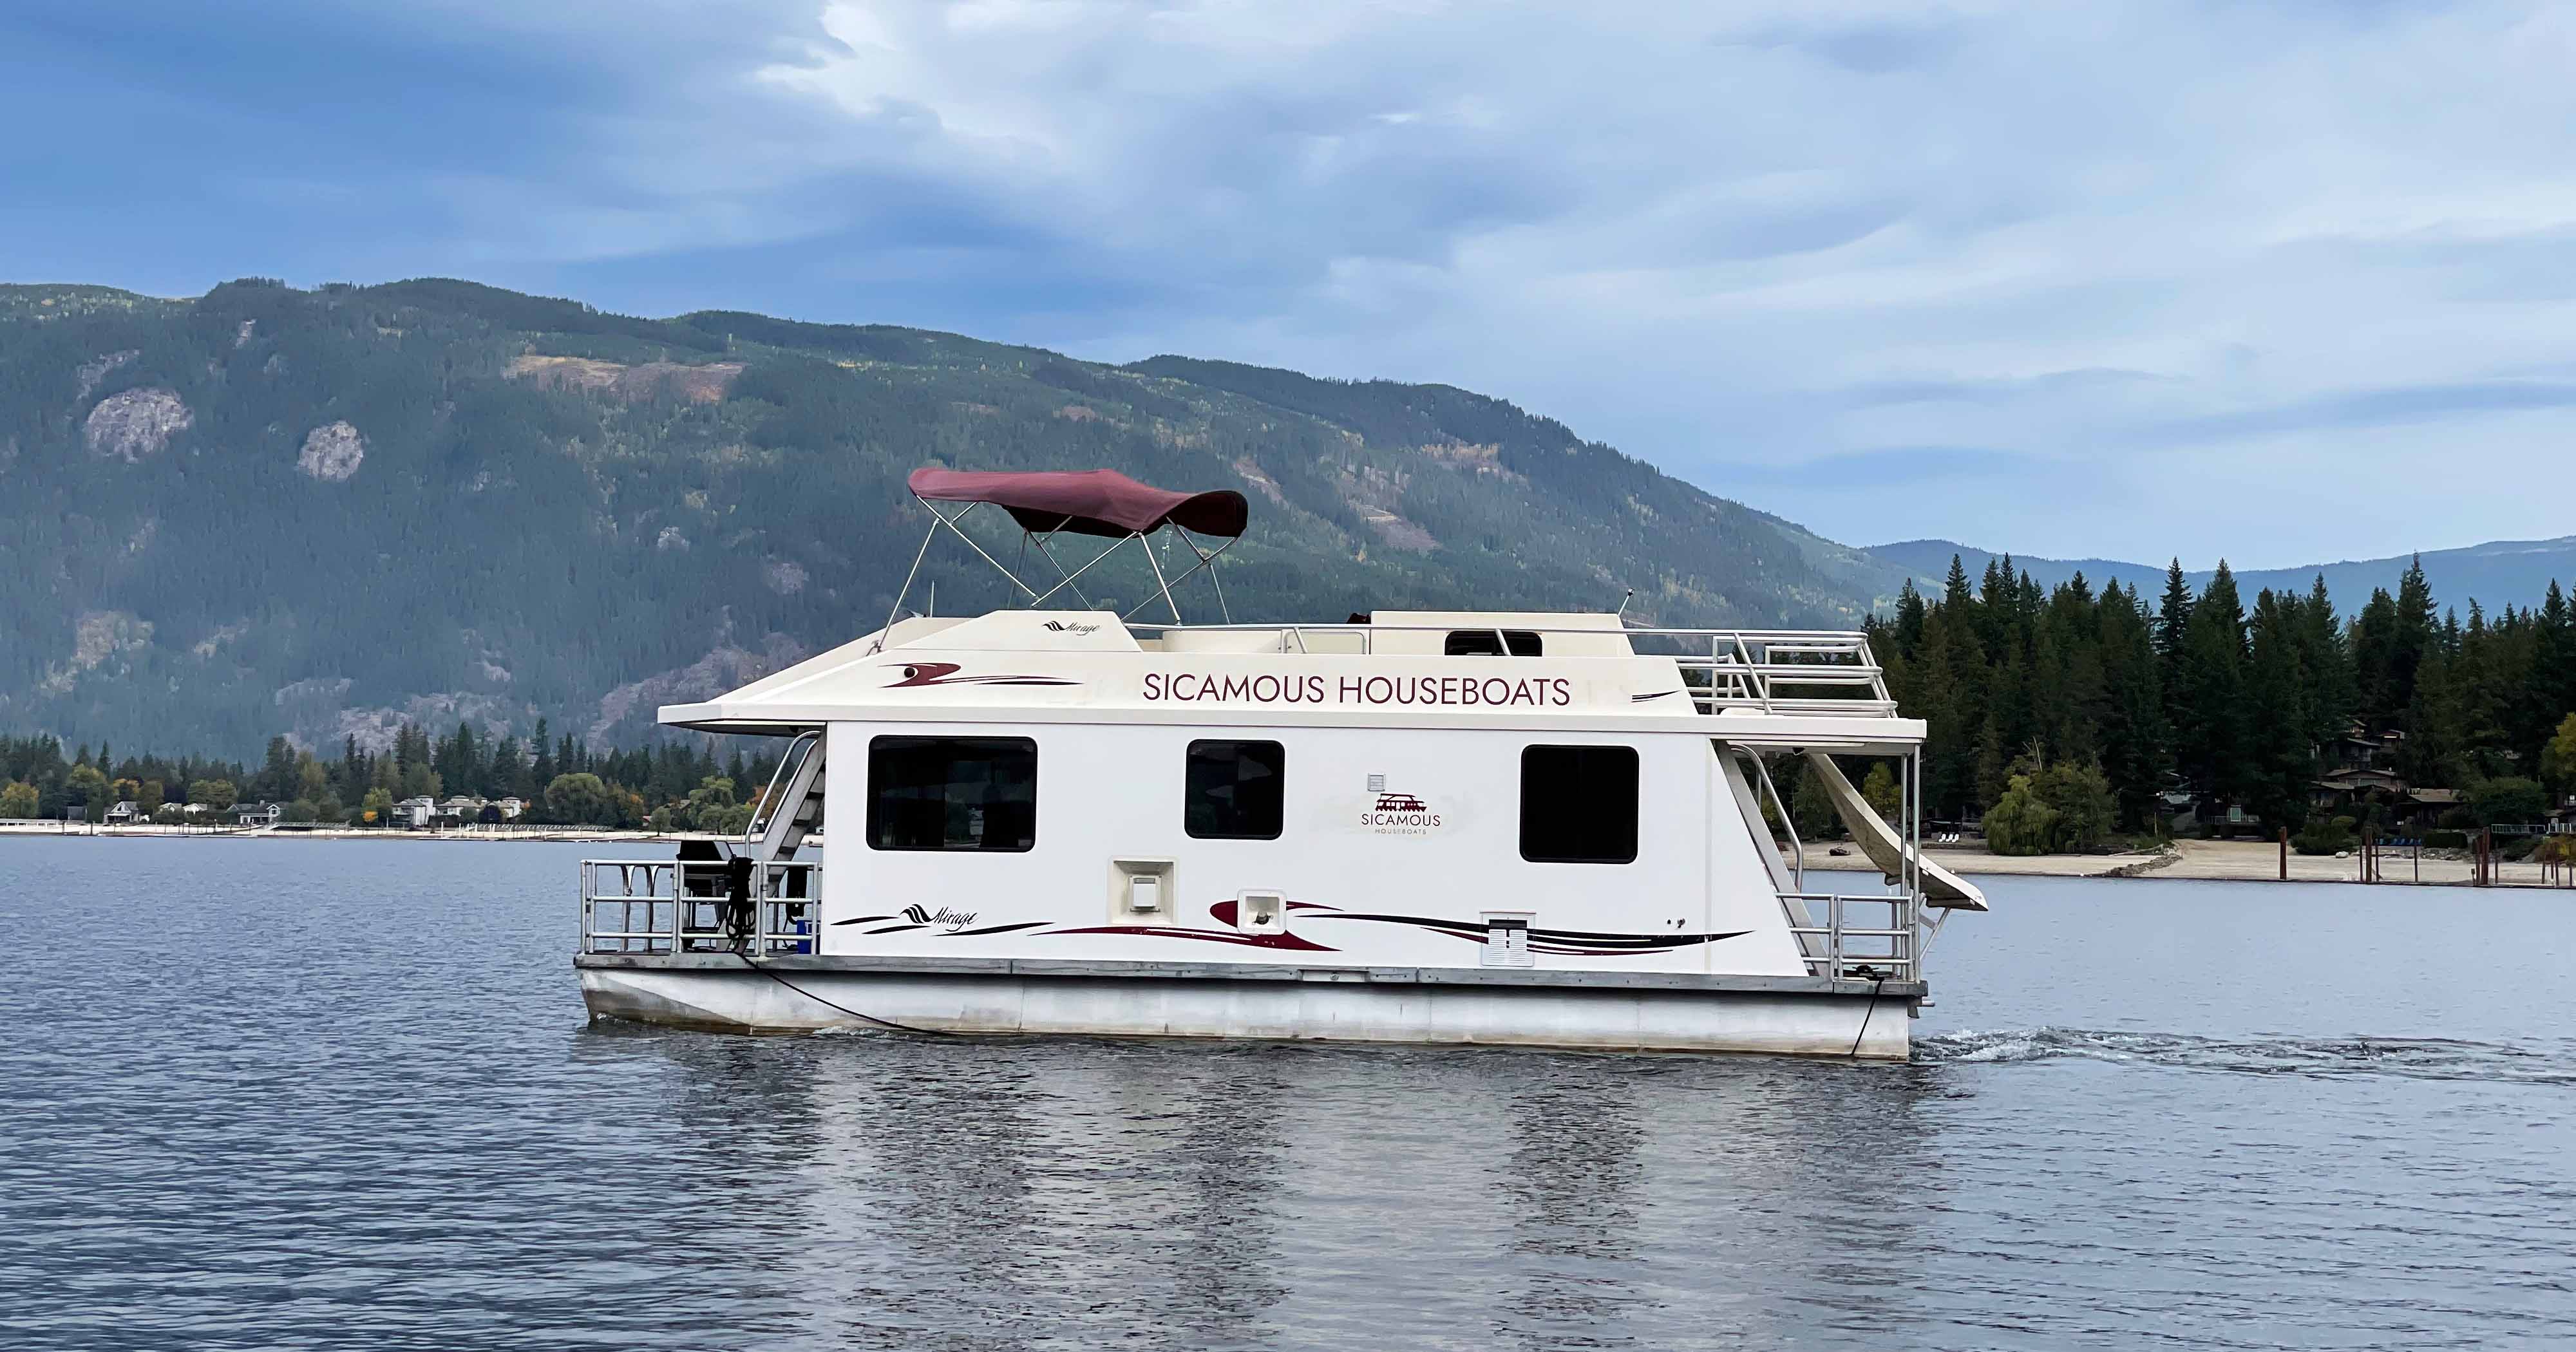 The Mirage 40 moored on a beach on Shuswap lake in the afternoon.